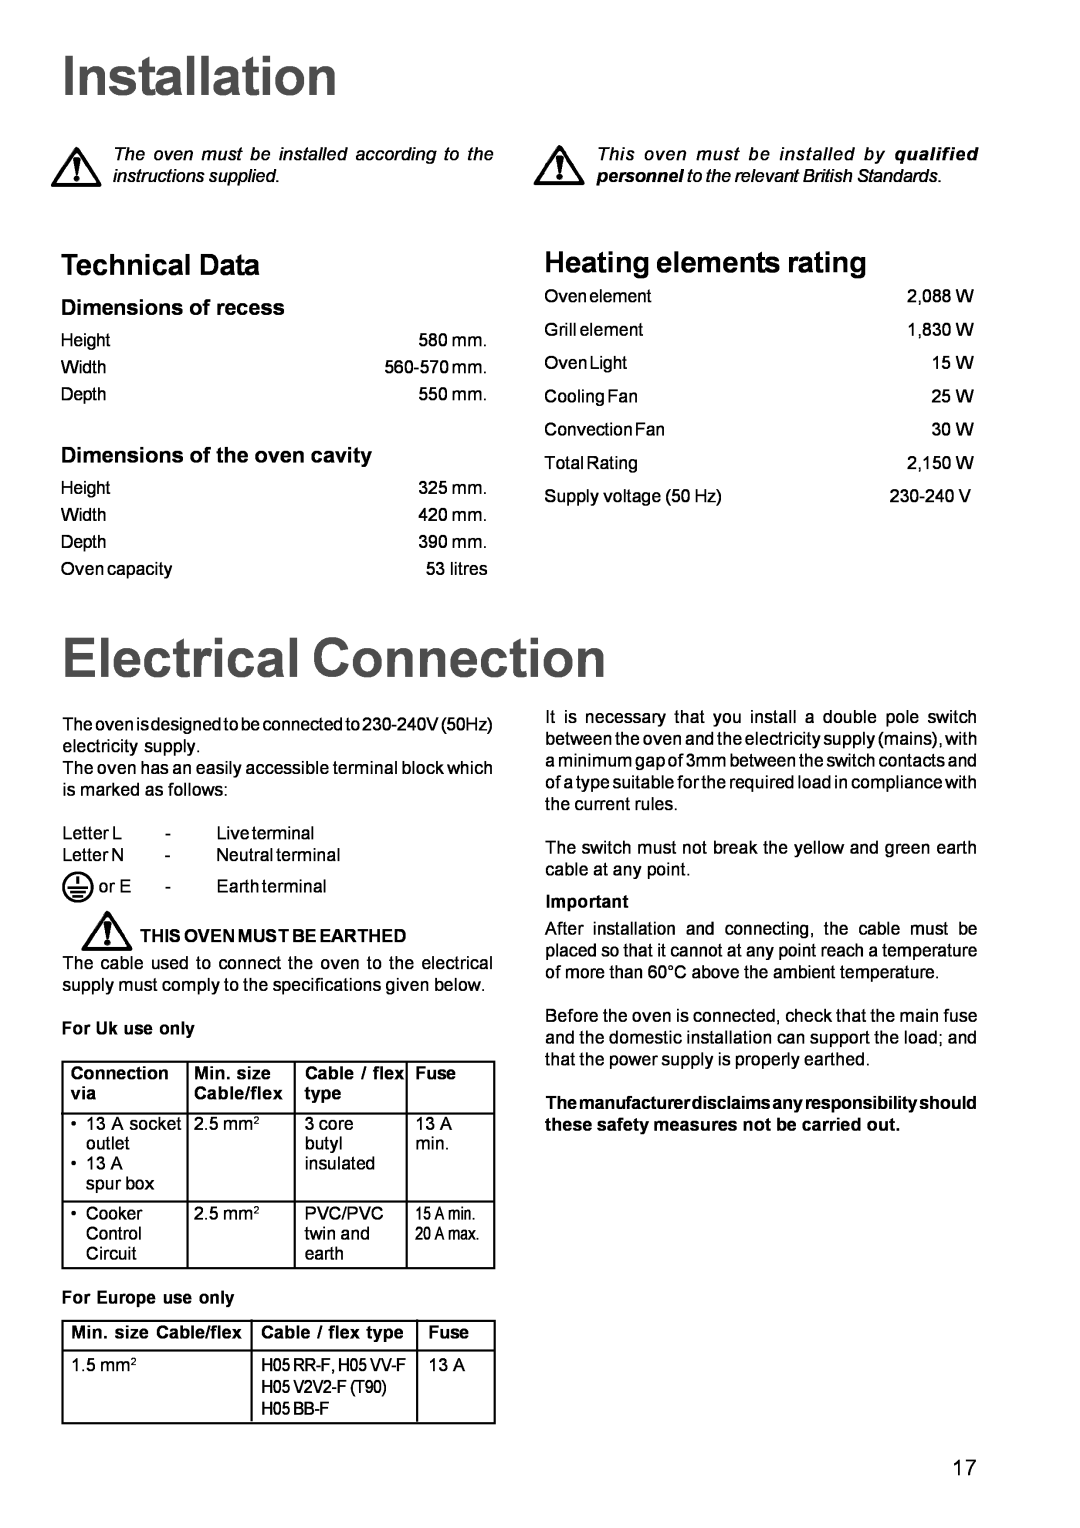 Zanussi ZBQ 365 manual Installation, Electrical Connection, Technical Data, Heating elements rating, Dimensions of recess 